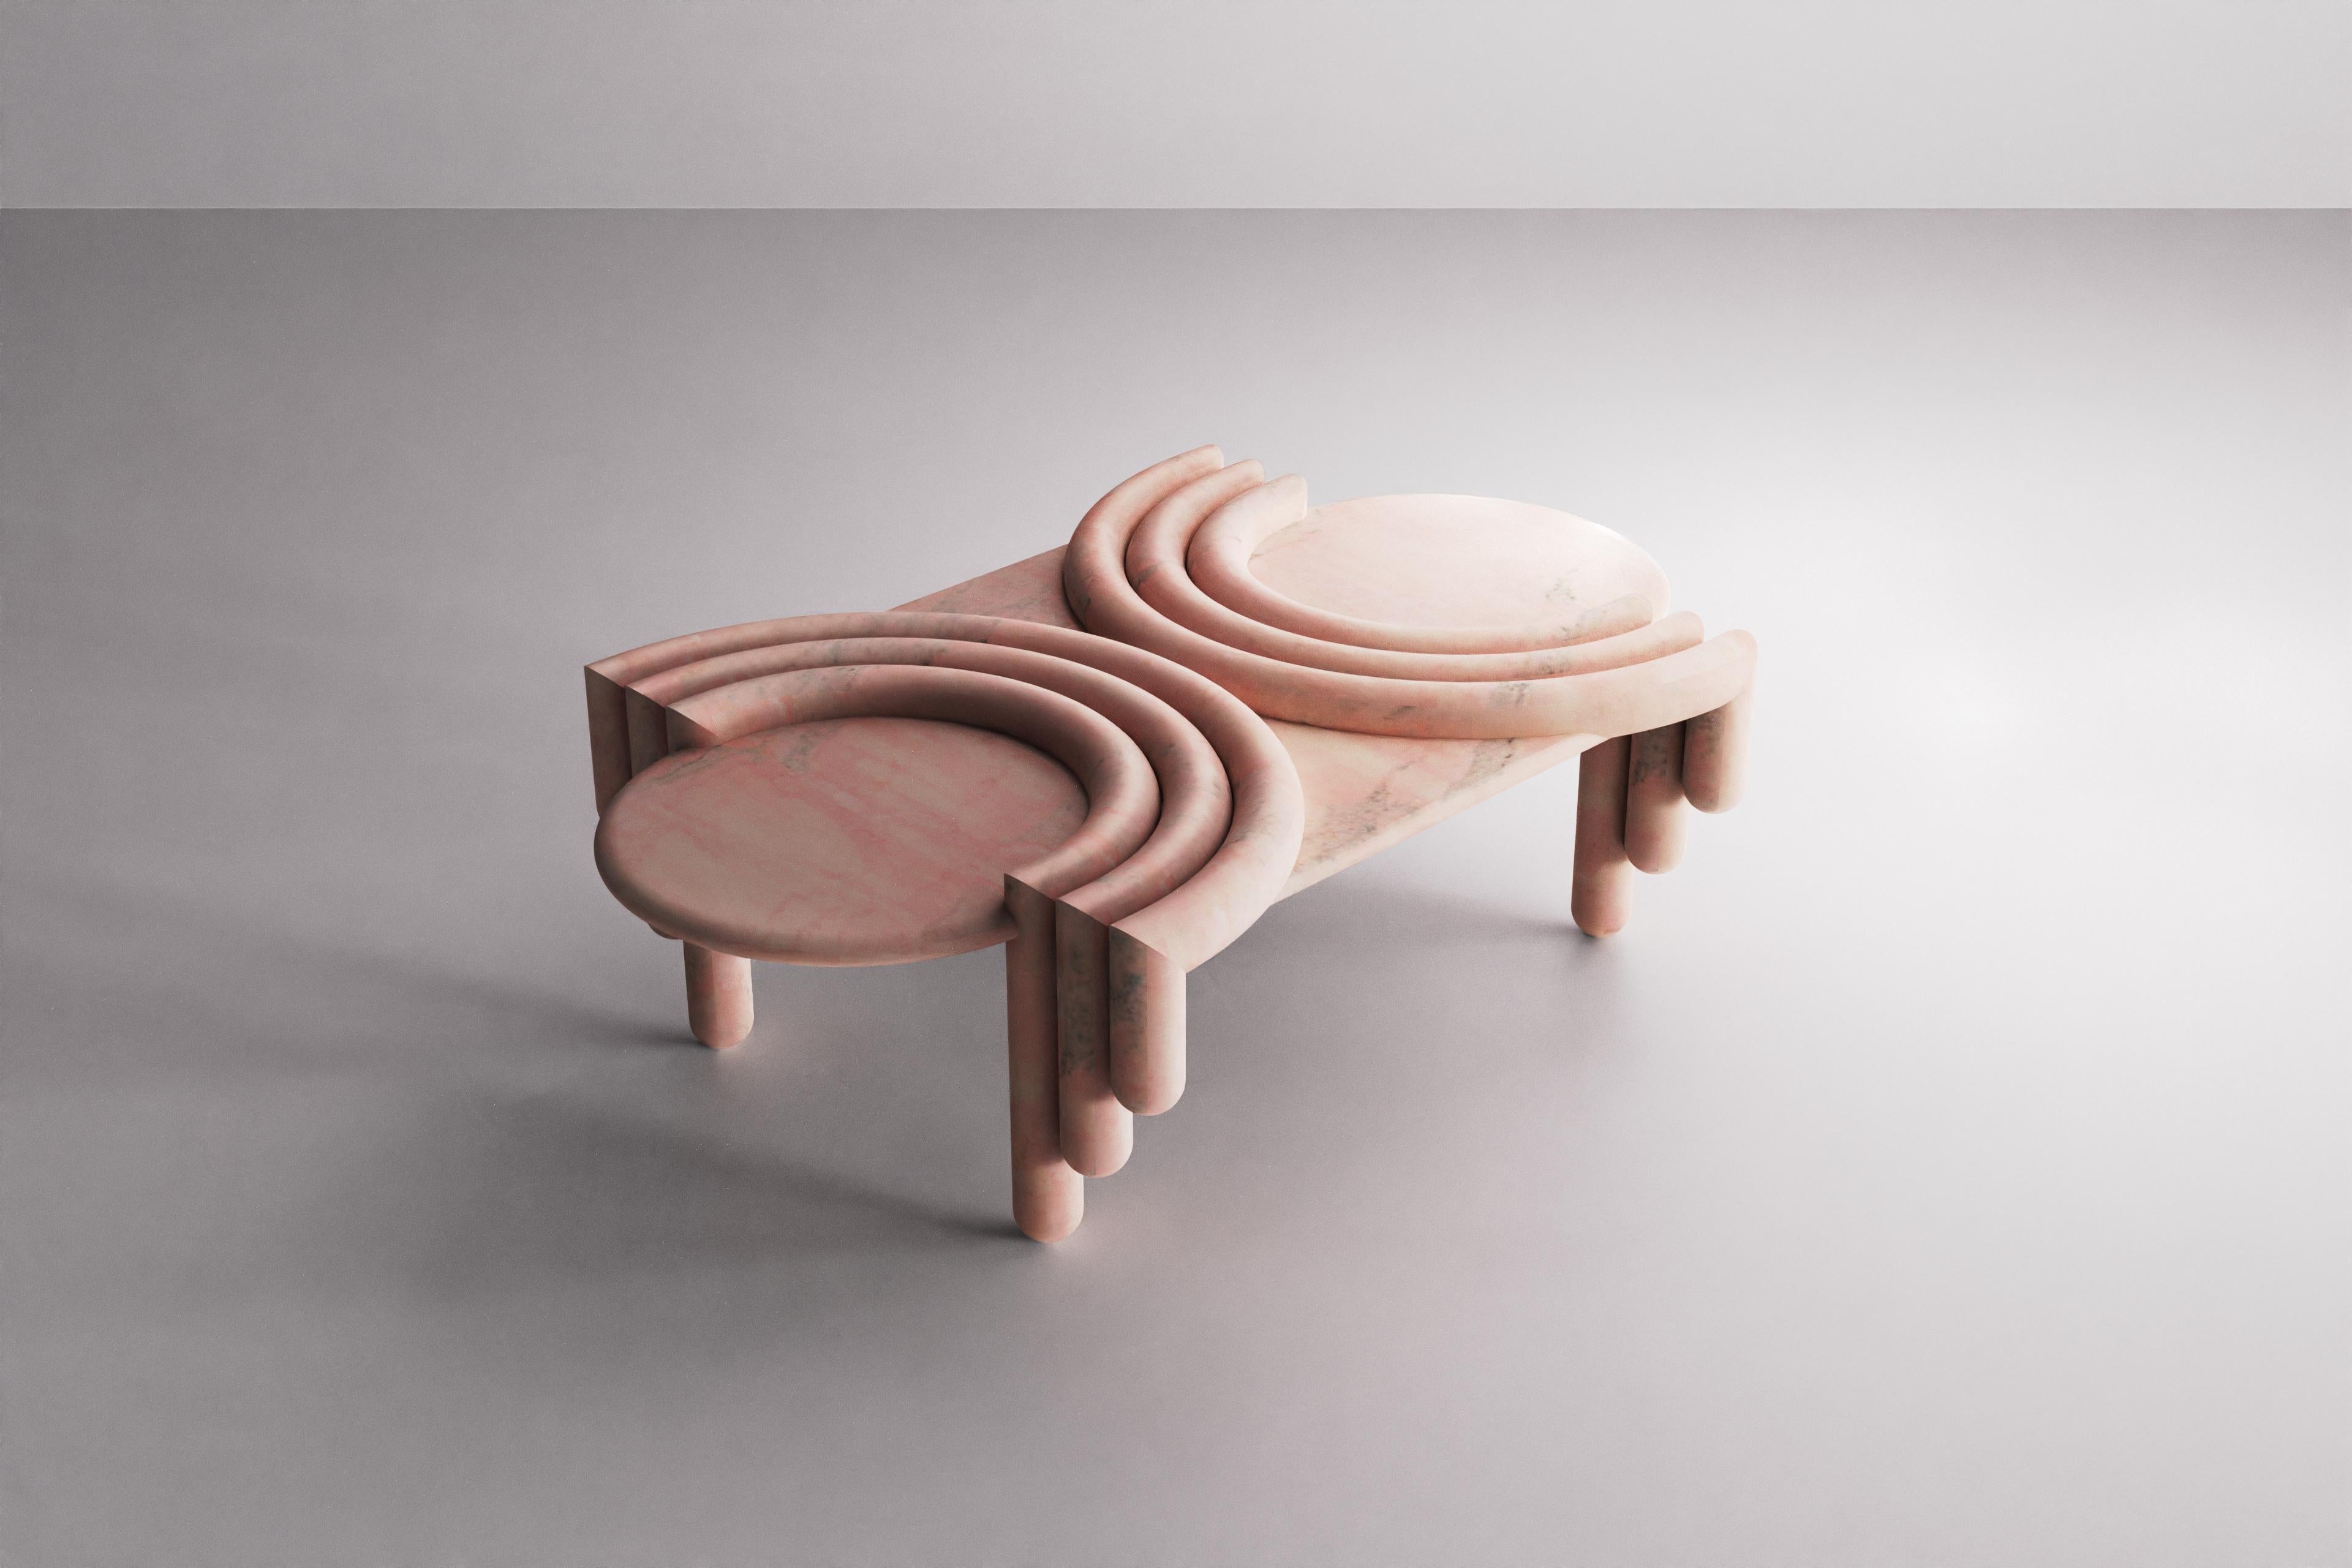 Modern Sculptural Kipferl Coffee Table by Lara Bohinc in Rosa Portugalo Marble For Sale